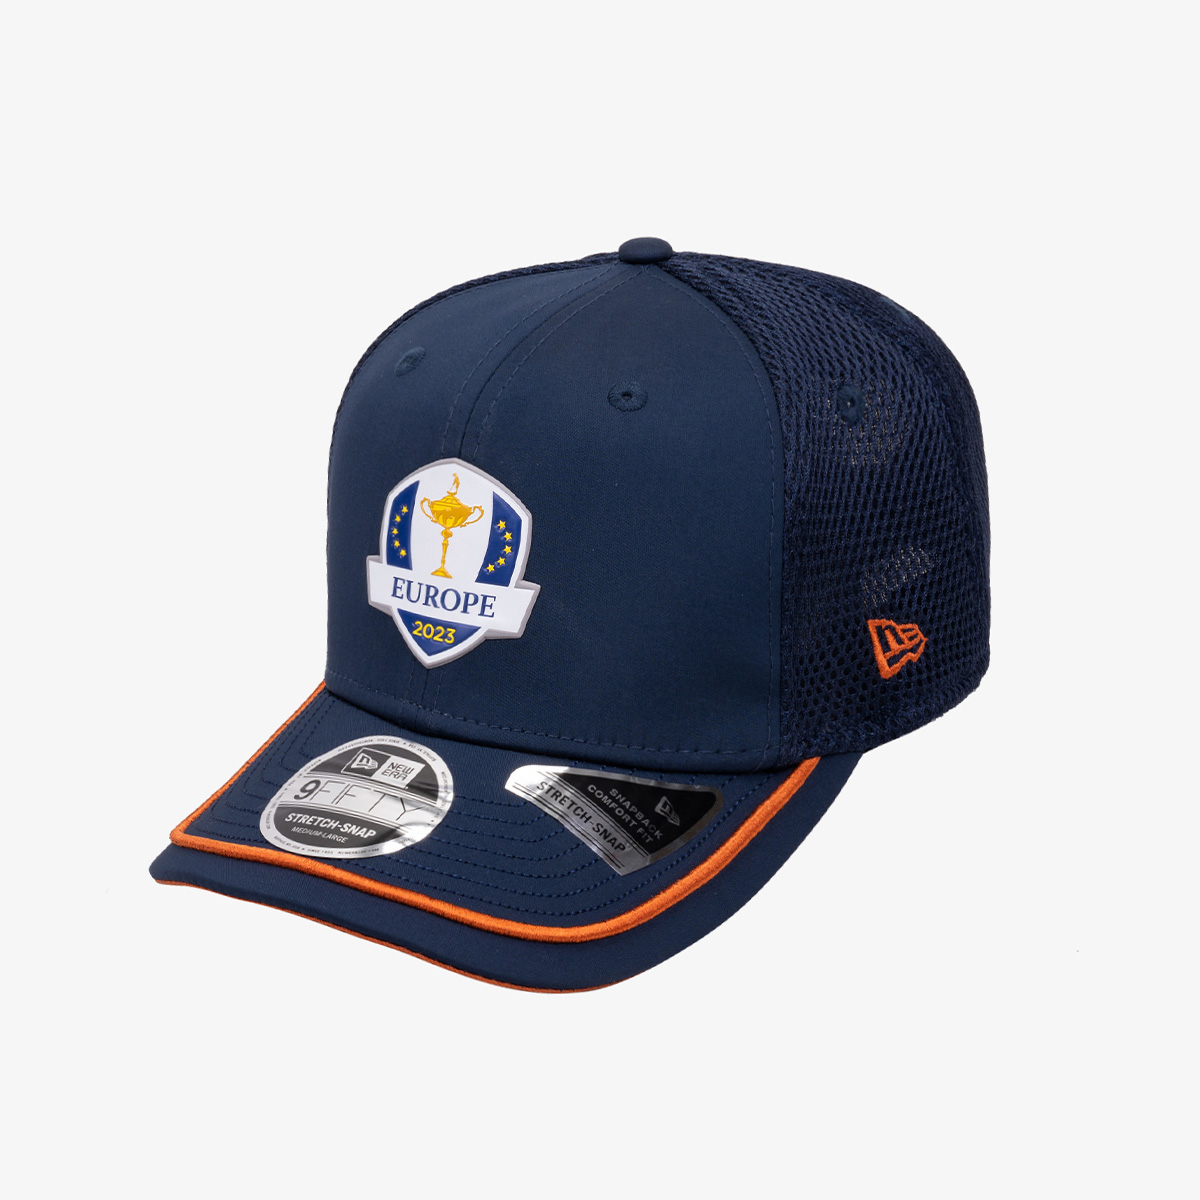 2023 Ryder Cup New Era 9FORTY Camo Cap - Grey - The Official